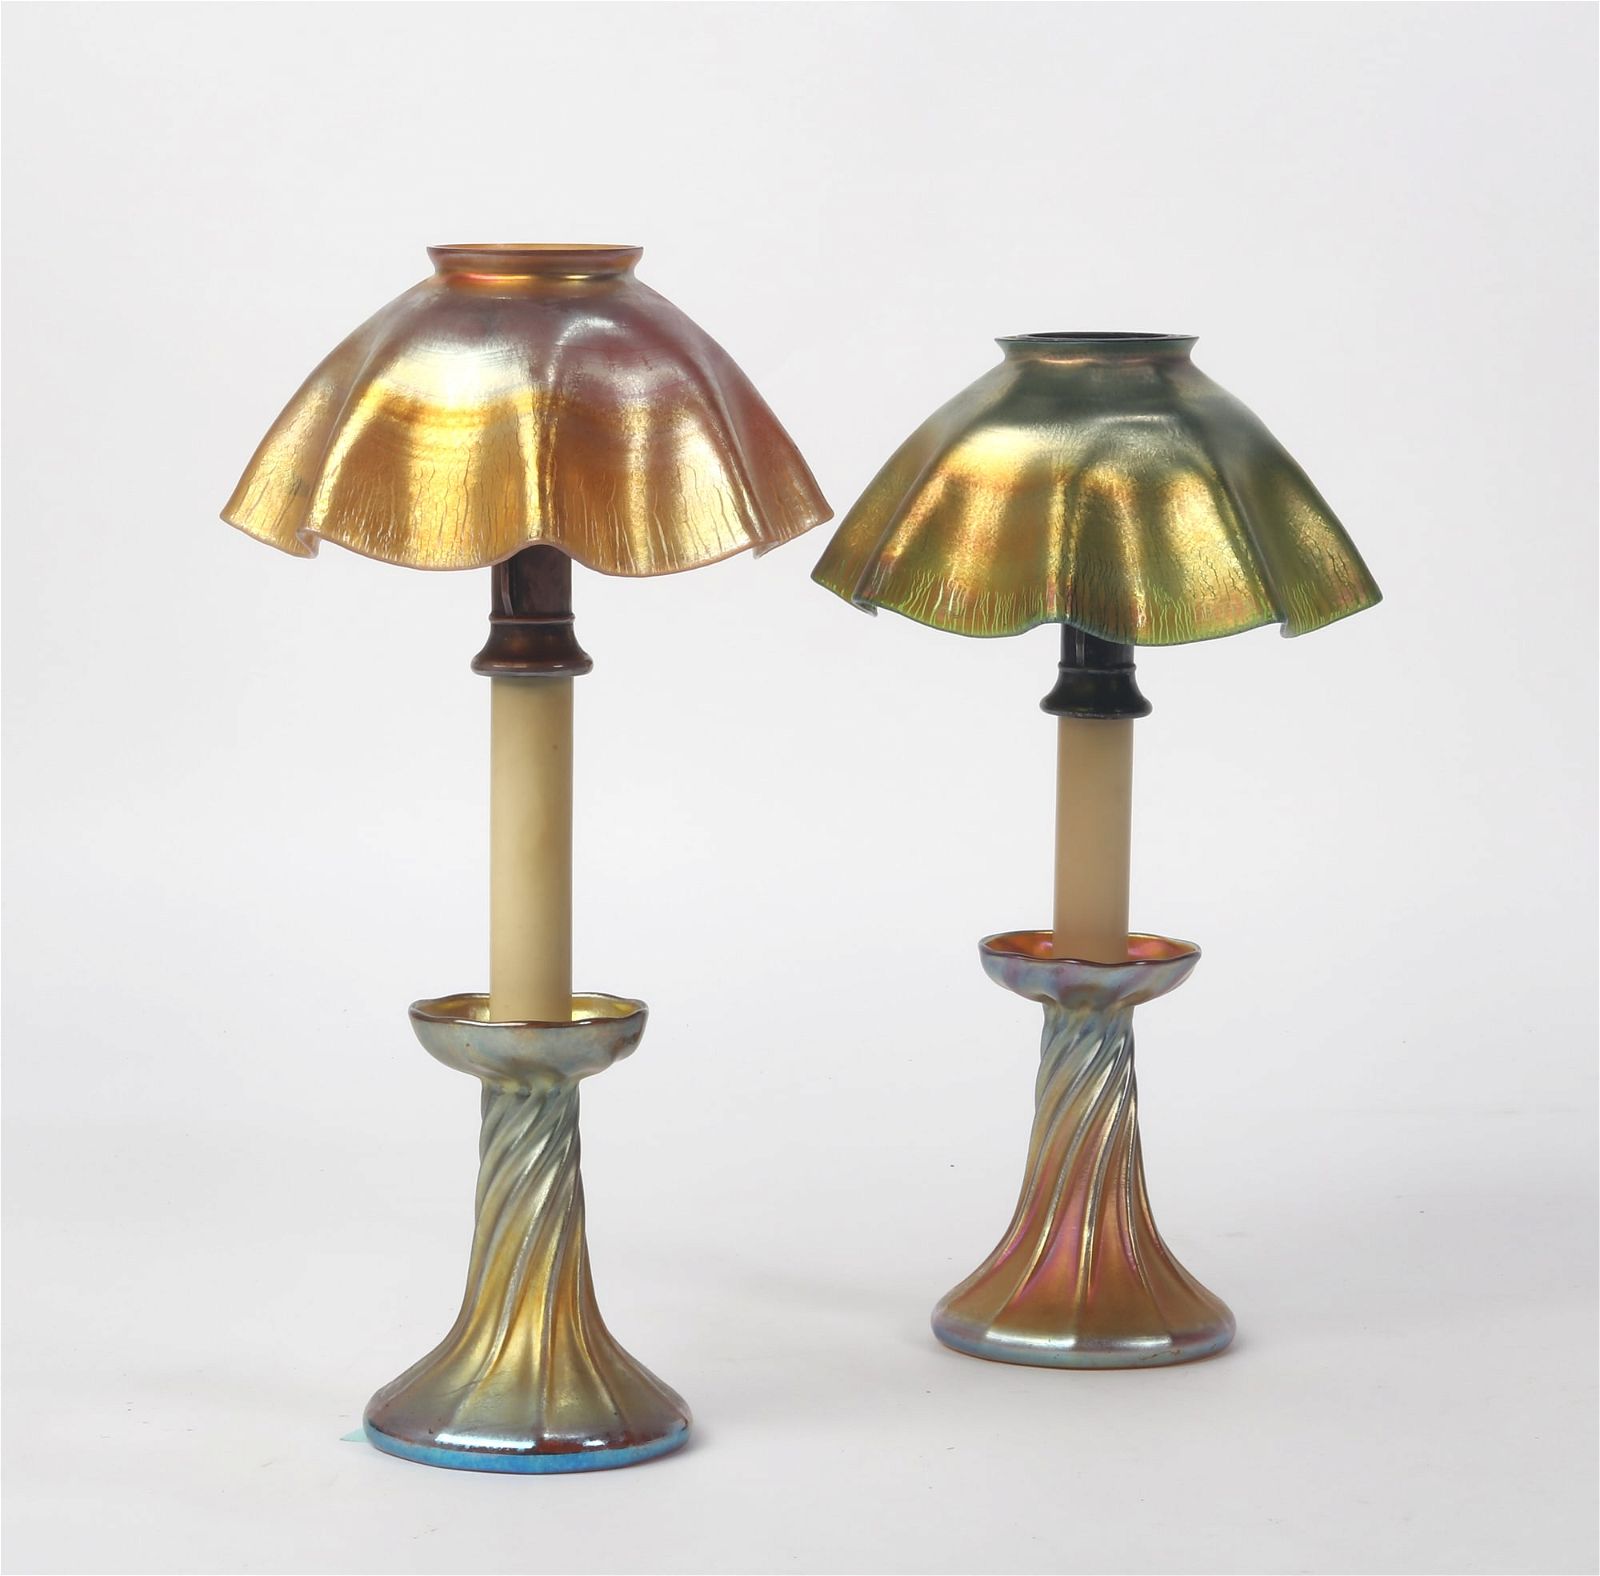 A PAIR OF TIFFANY STUDIOS FAVRILE